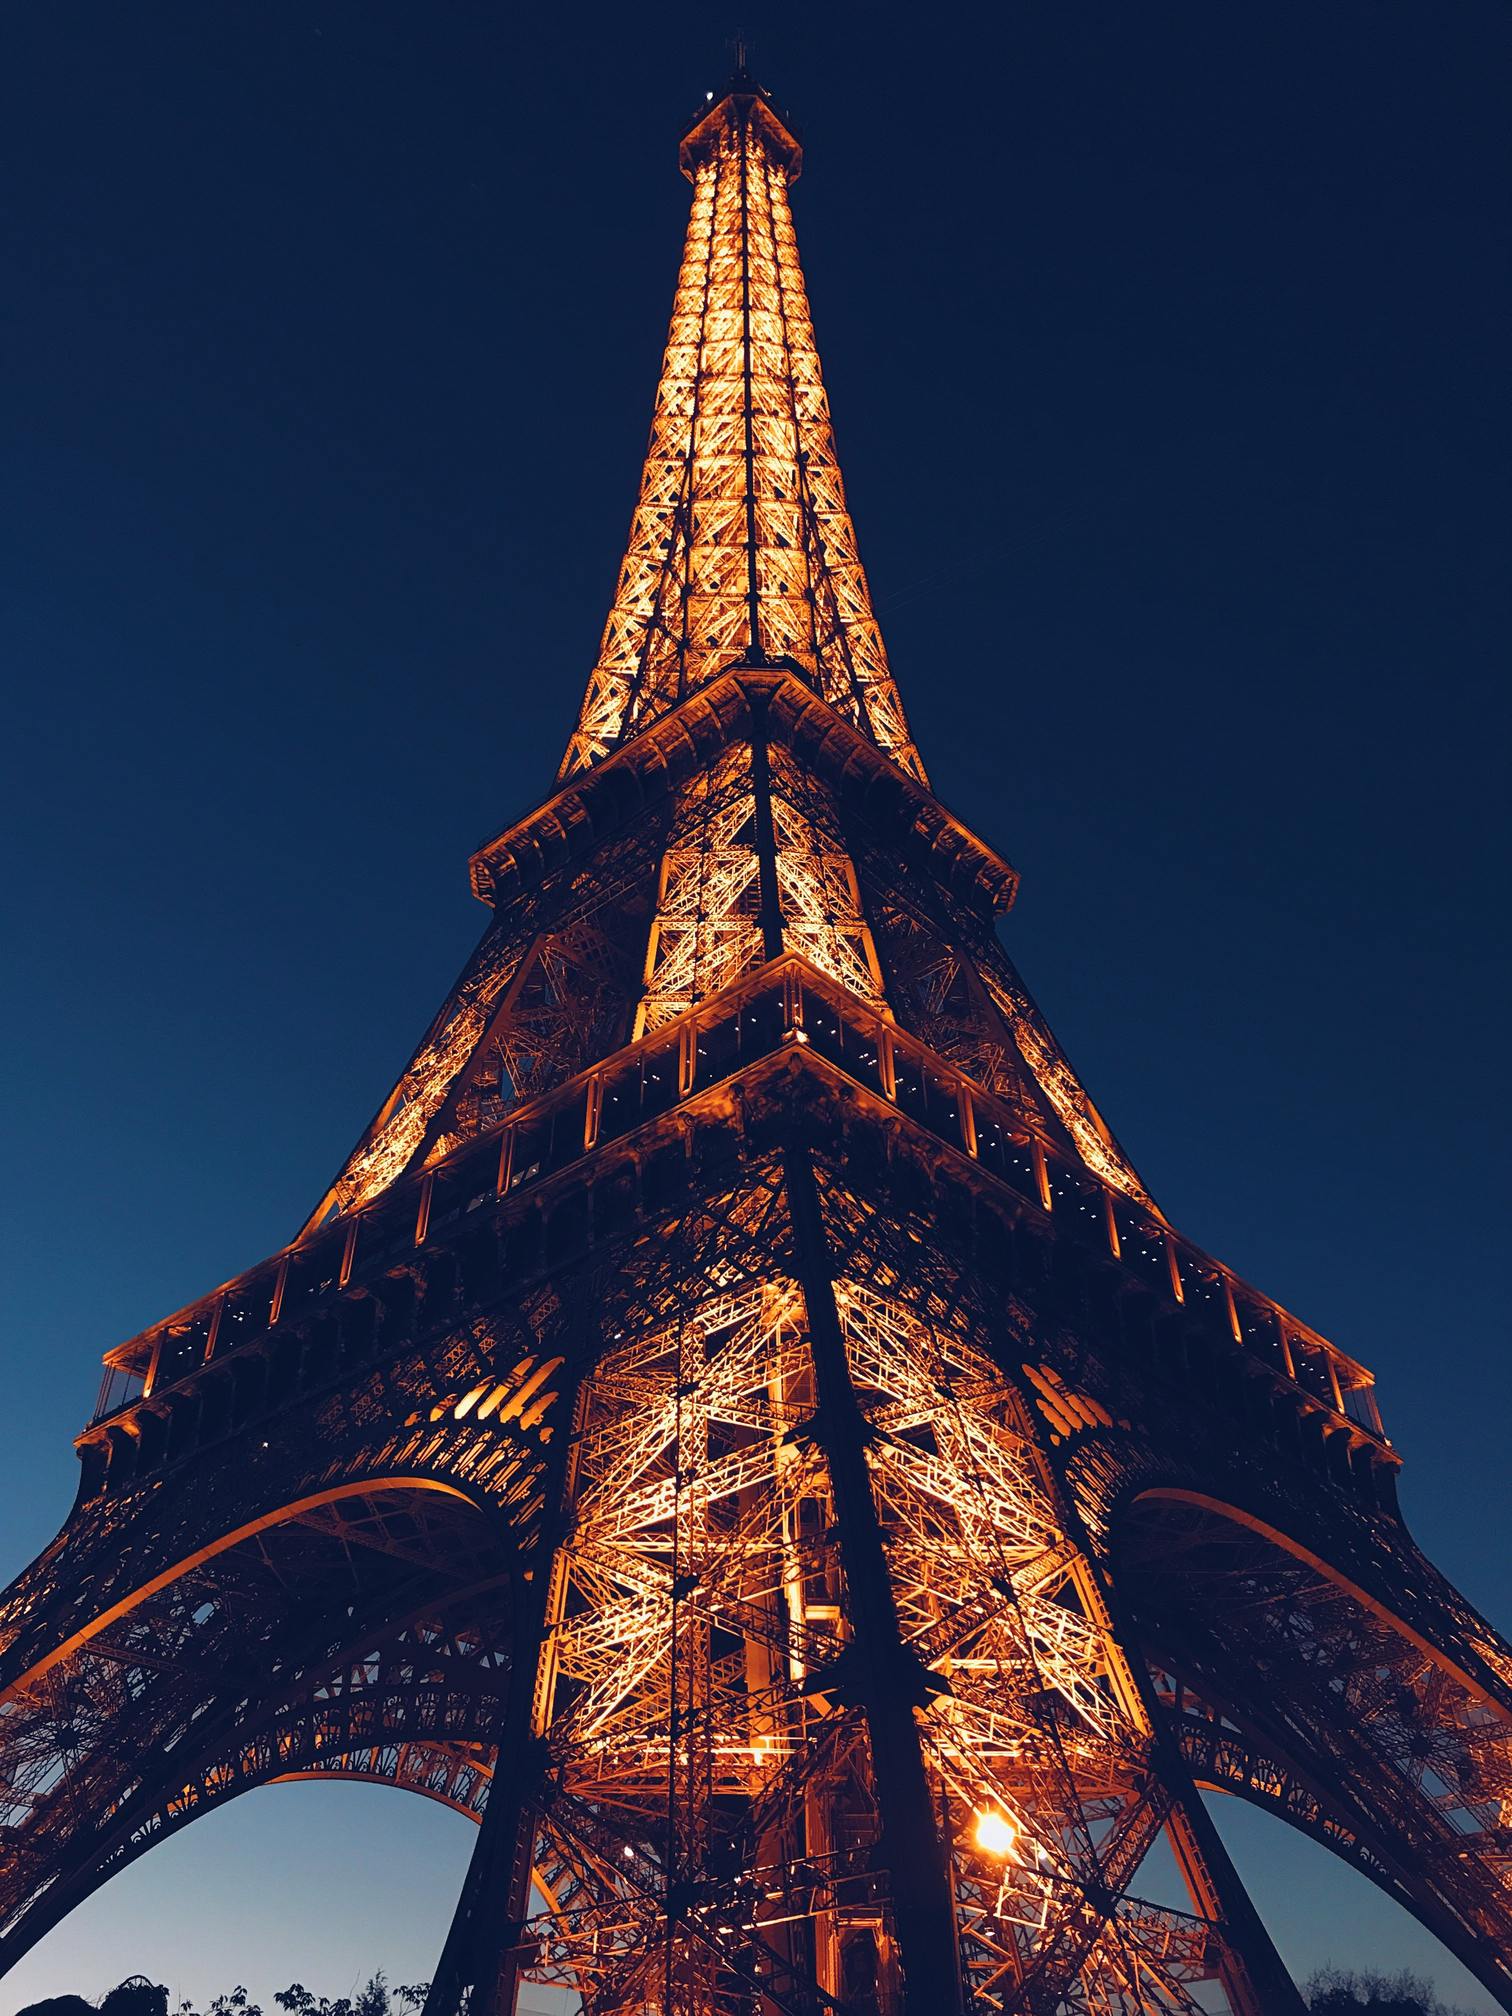 Eiffel Tower in Paris is a must visit monument in your First Holiday to Europe